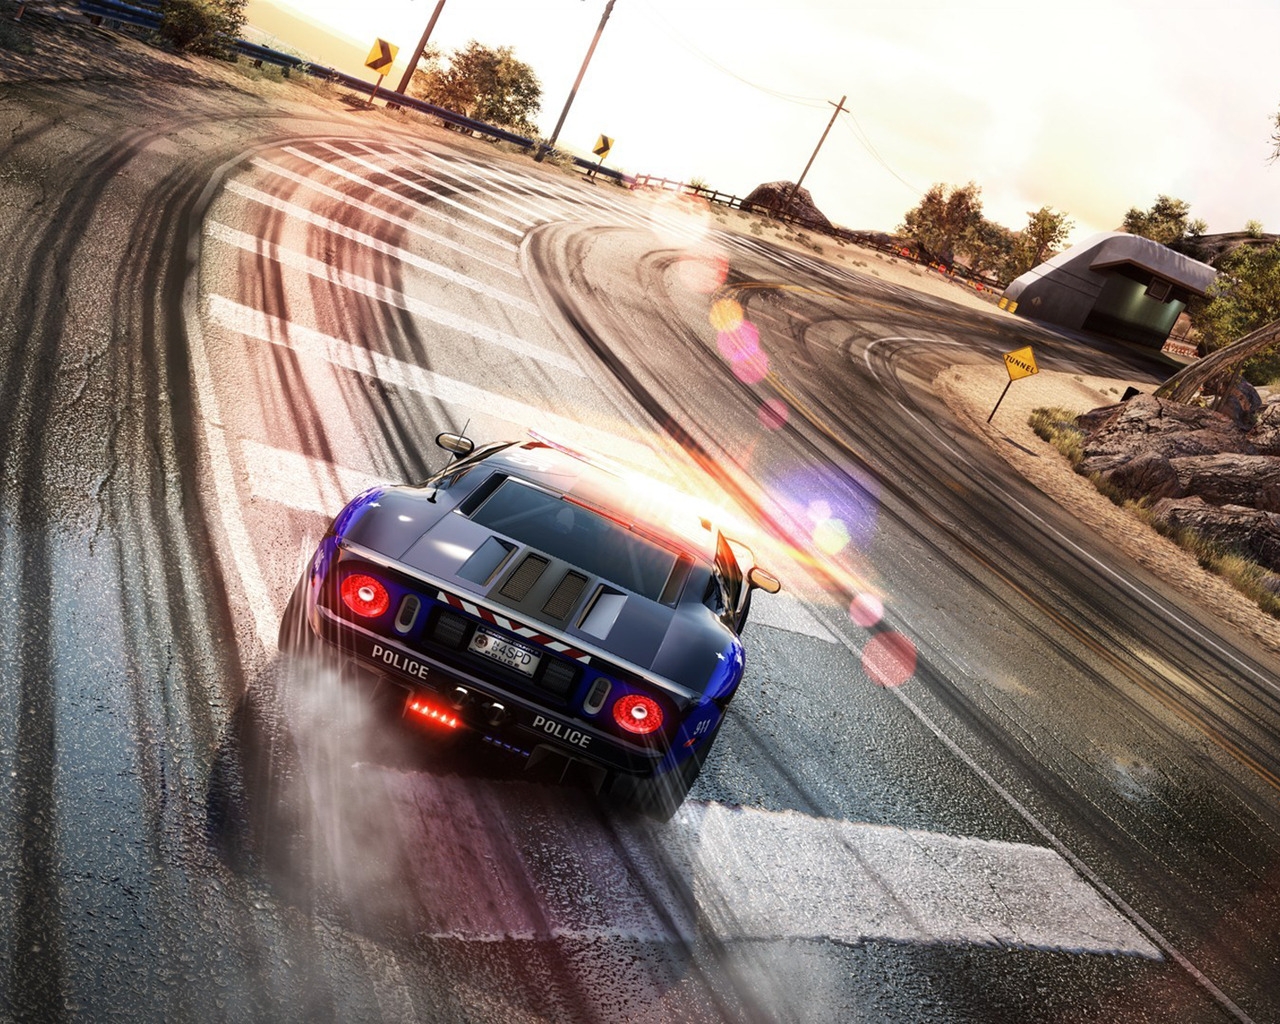 NFS Hot Pursuit for 1280 x 1024 resolution